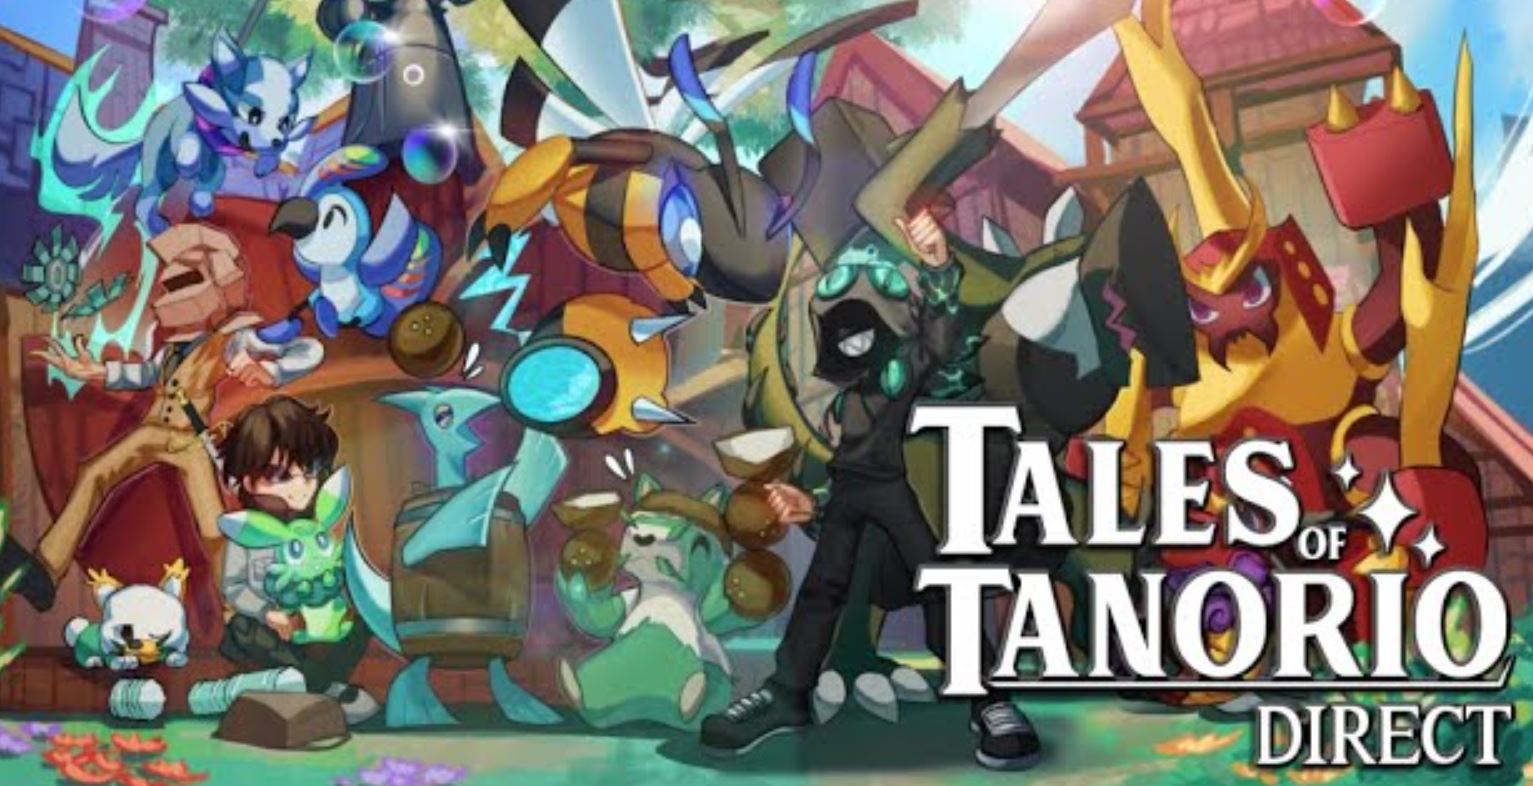 Are you excited about the upcoming Tales of Tanorio Spring Hunt Event? Let's dive into some insights based on the latest official announcements.